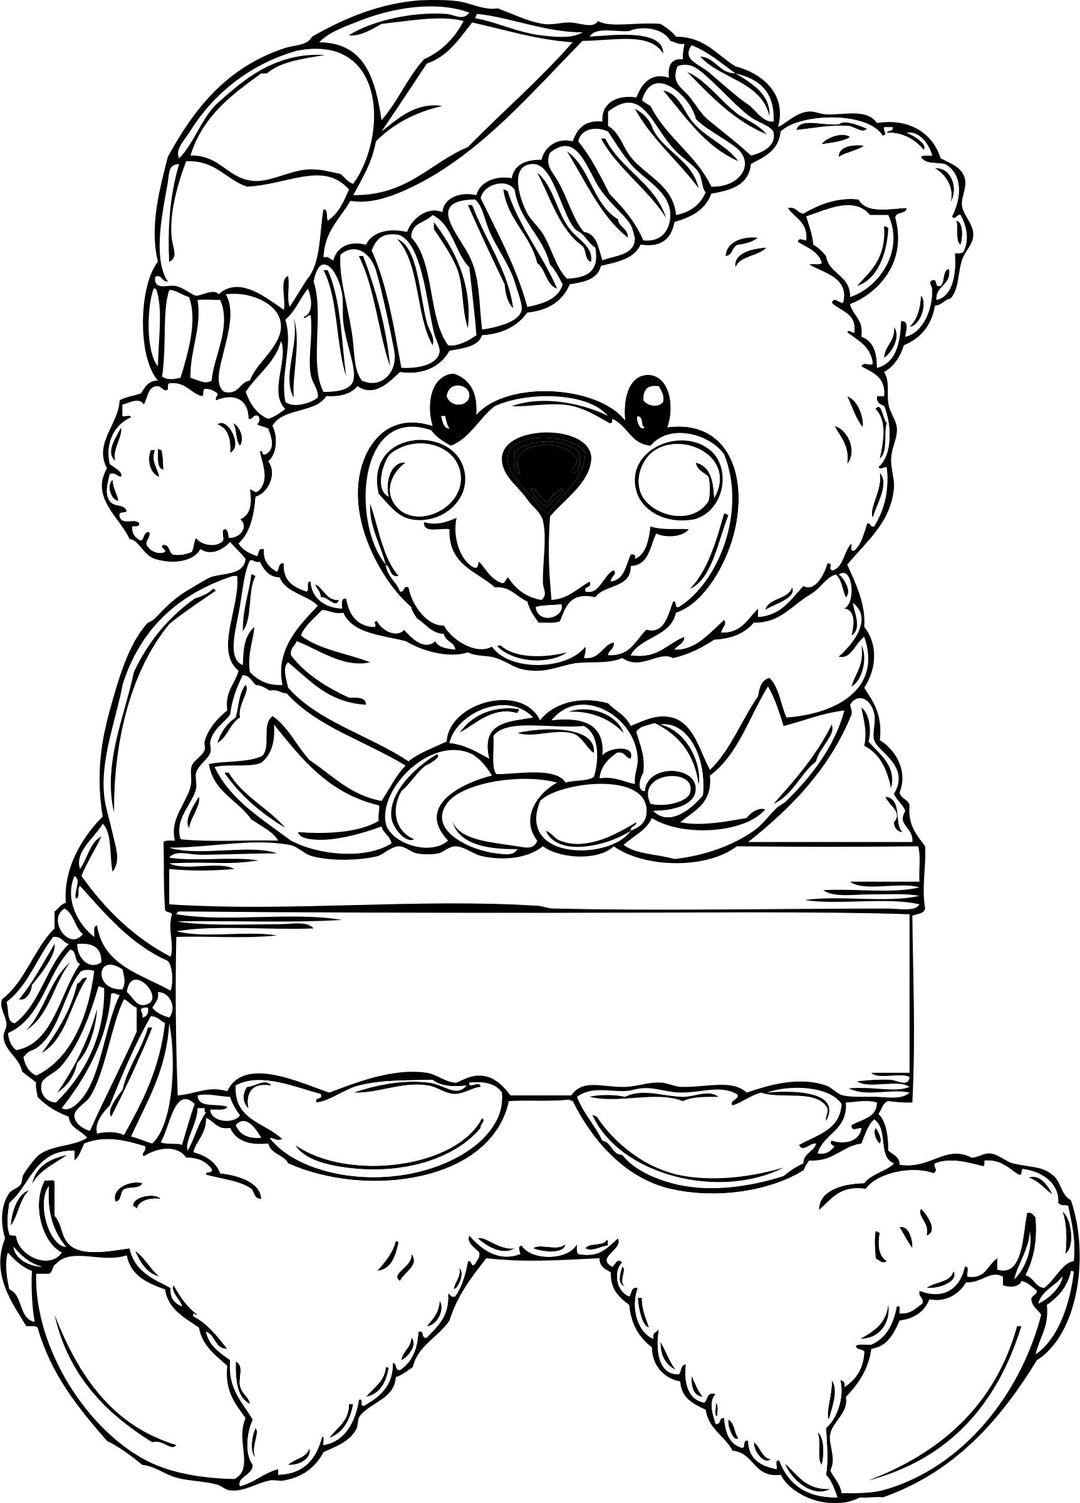 Christmas Bear Coloring Page png transparent